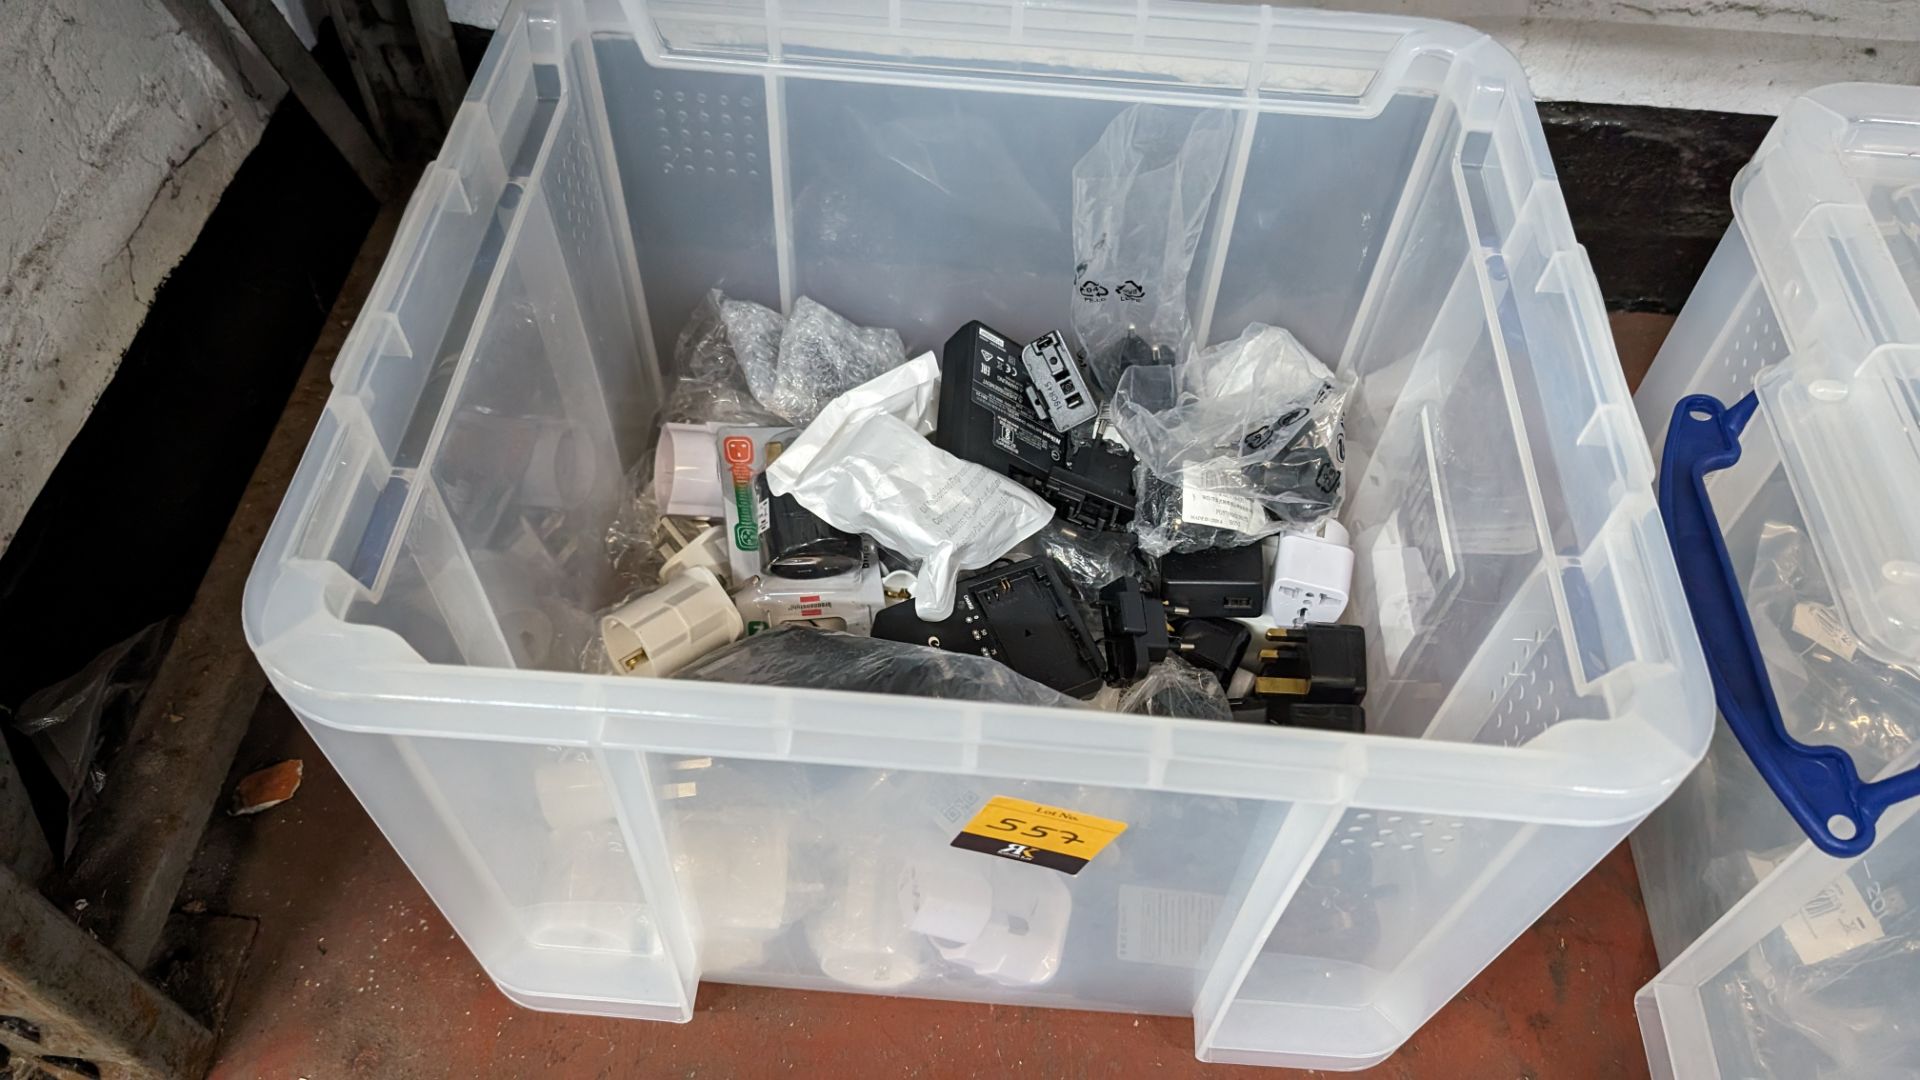 The contents of a crate of assorted power adaptors, battery charges and related